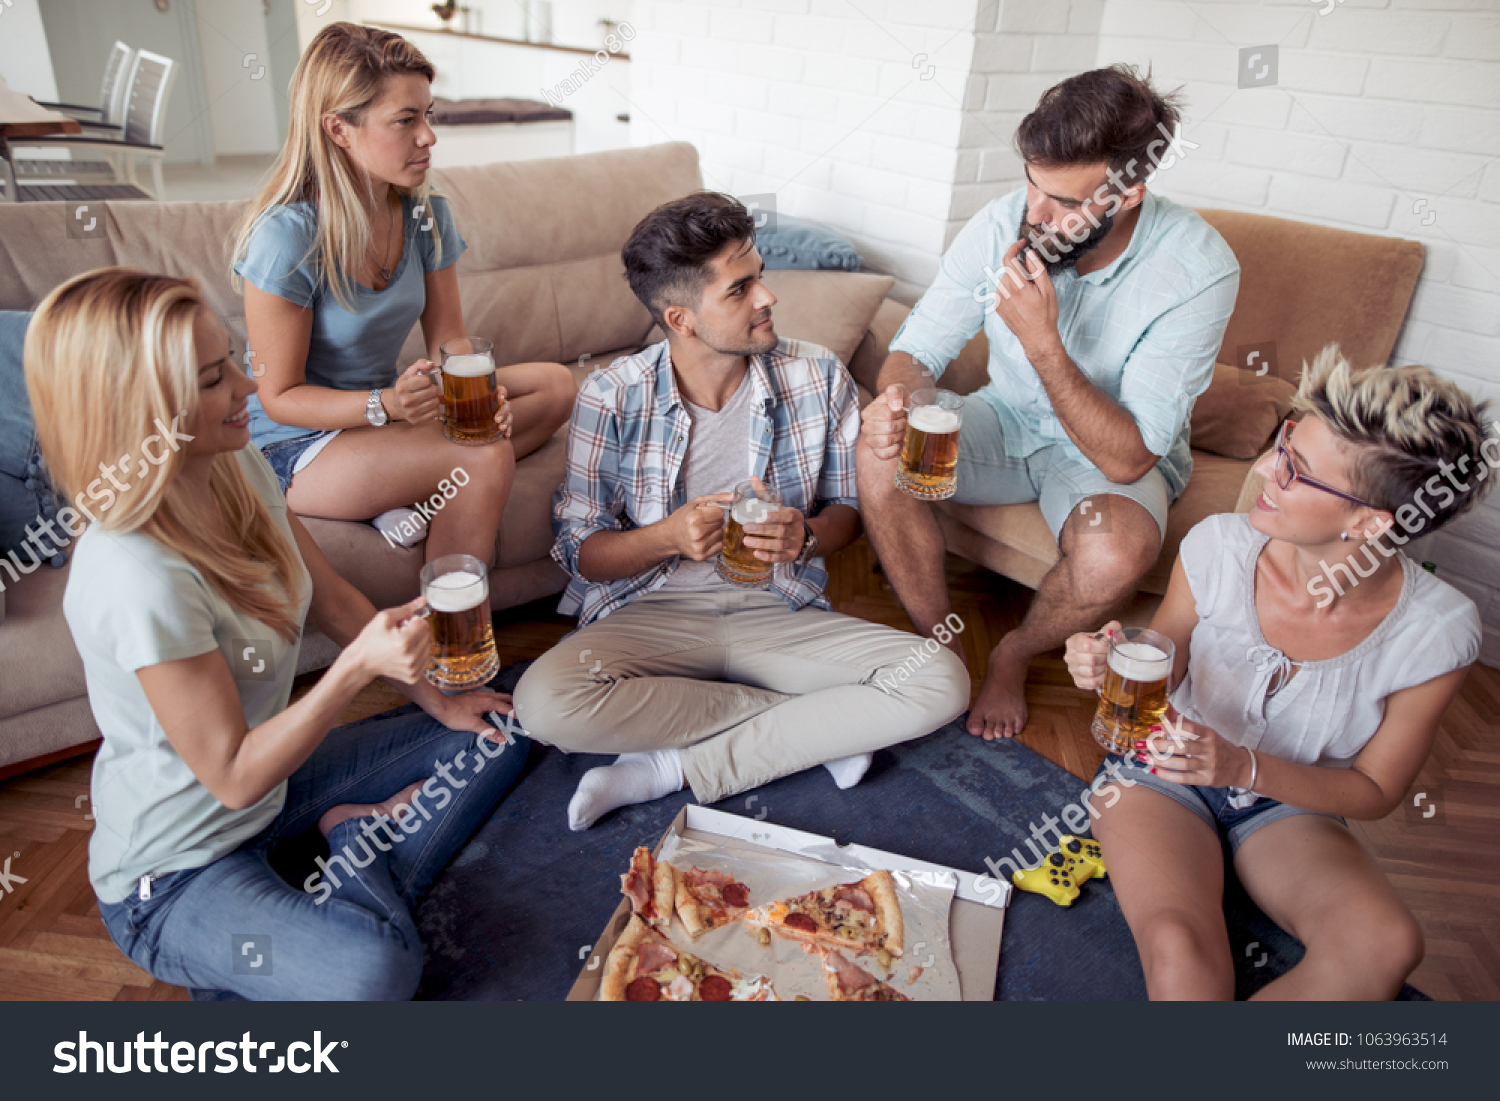 Group of playful young people eating pizza while having fun together. #1063963514